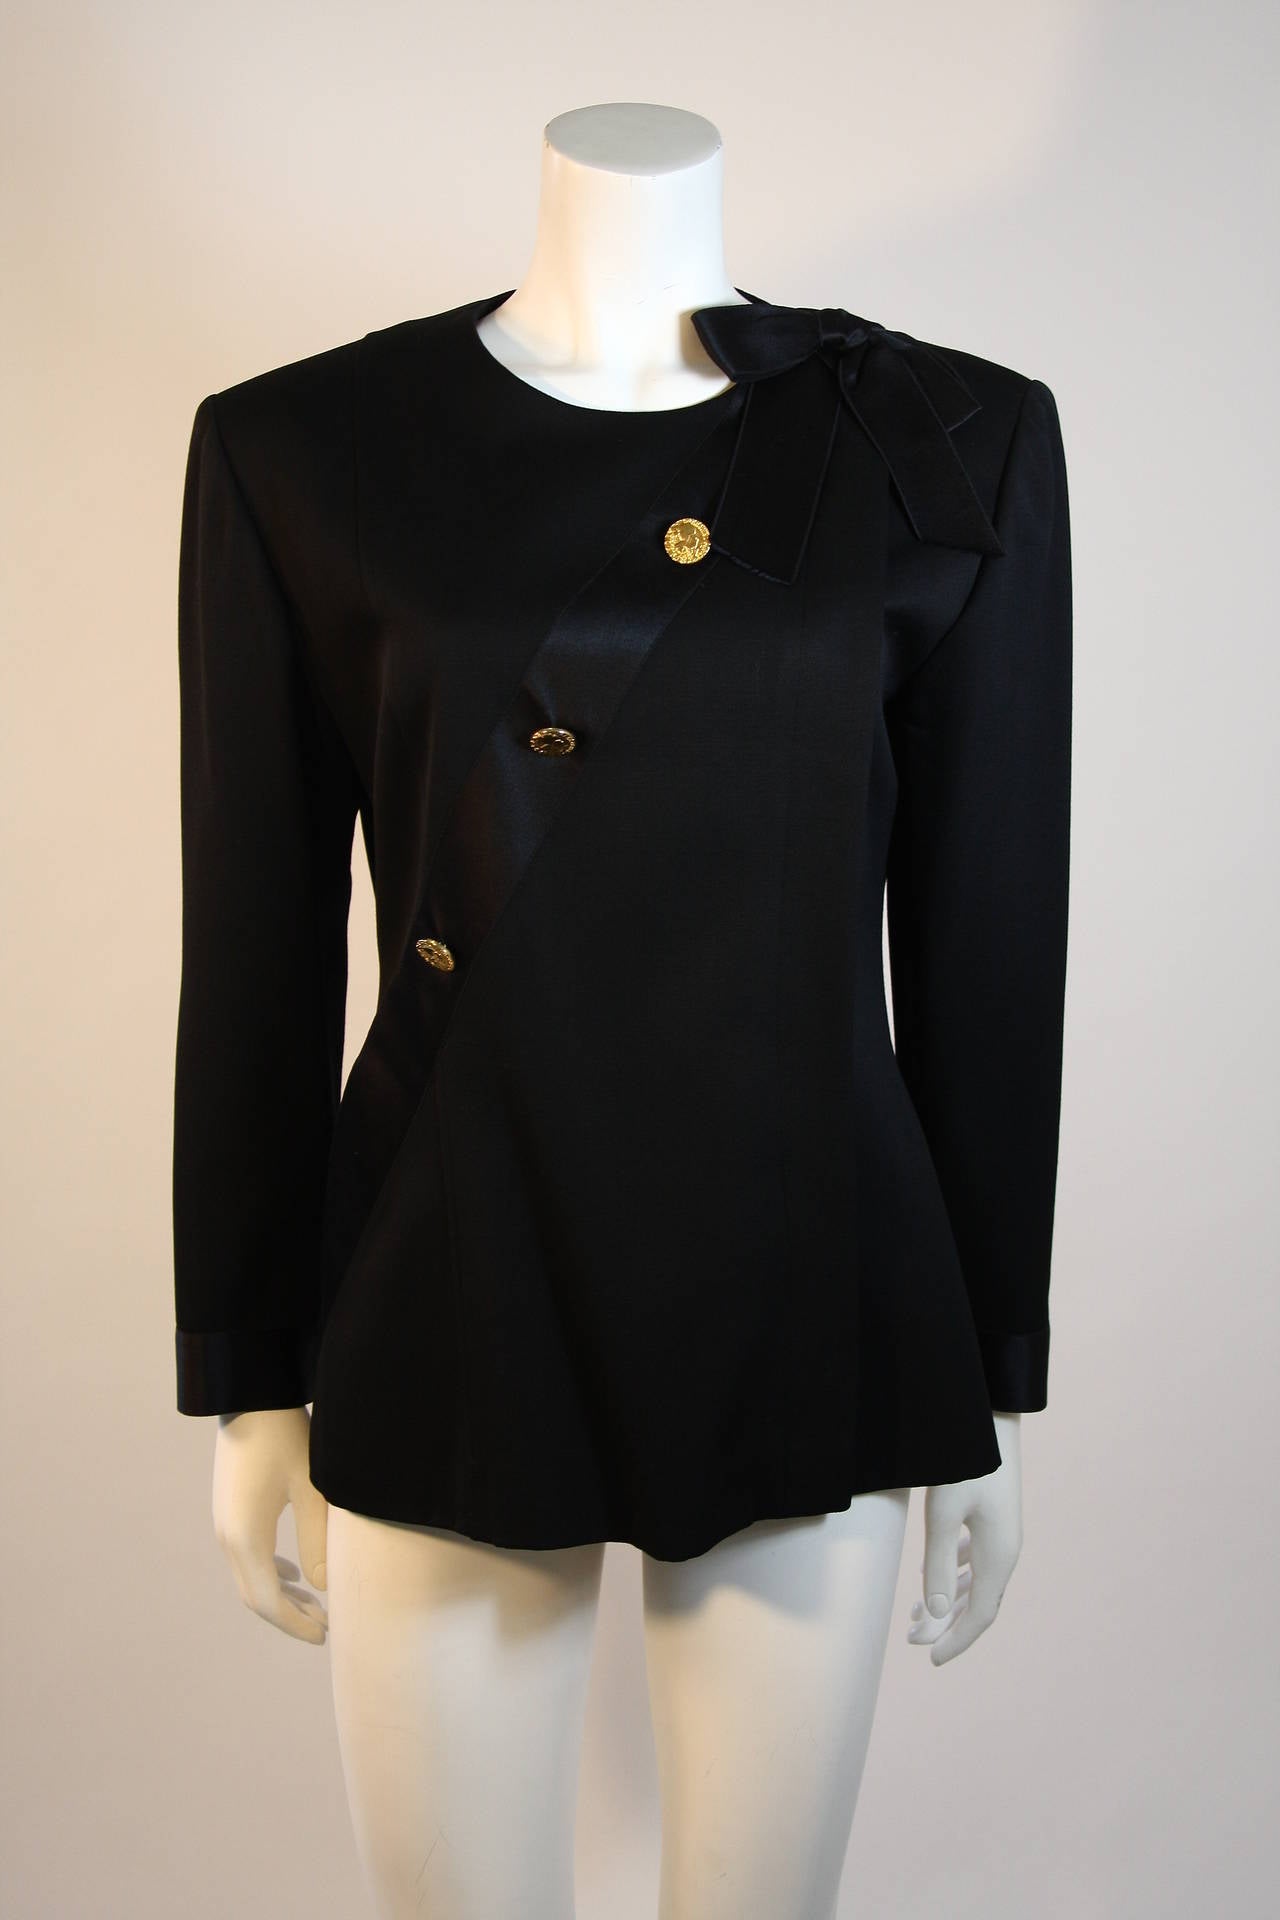 2001 Chanel Black wool with Silk Ribbon Sash & Bow Jacket & Skirt Suit For Sale 1